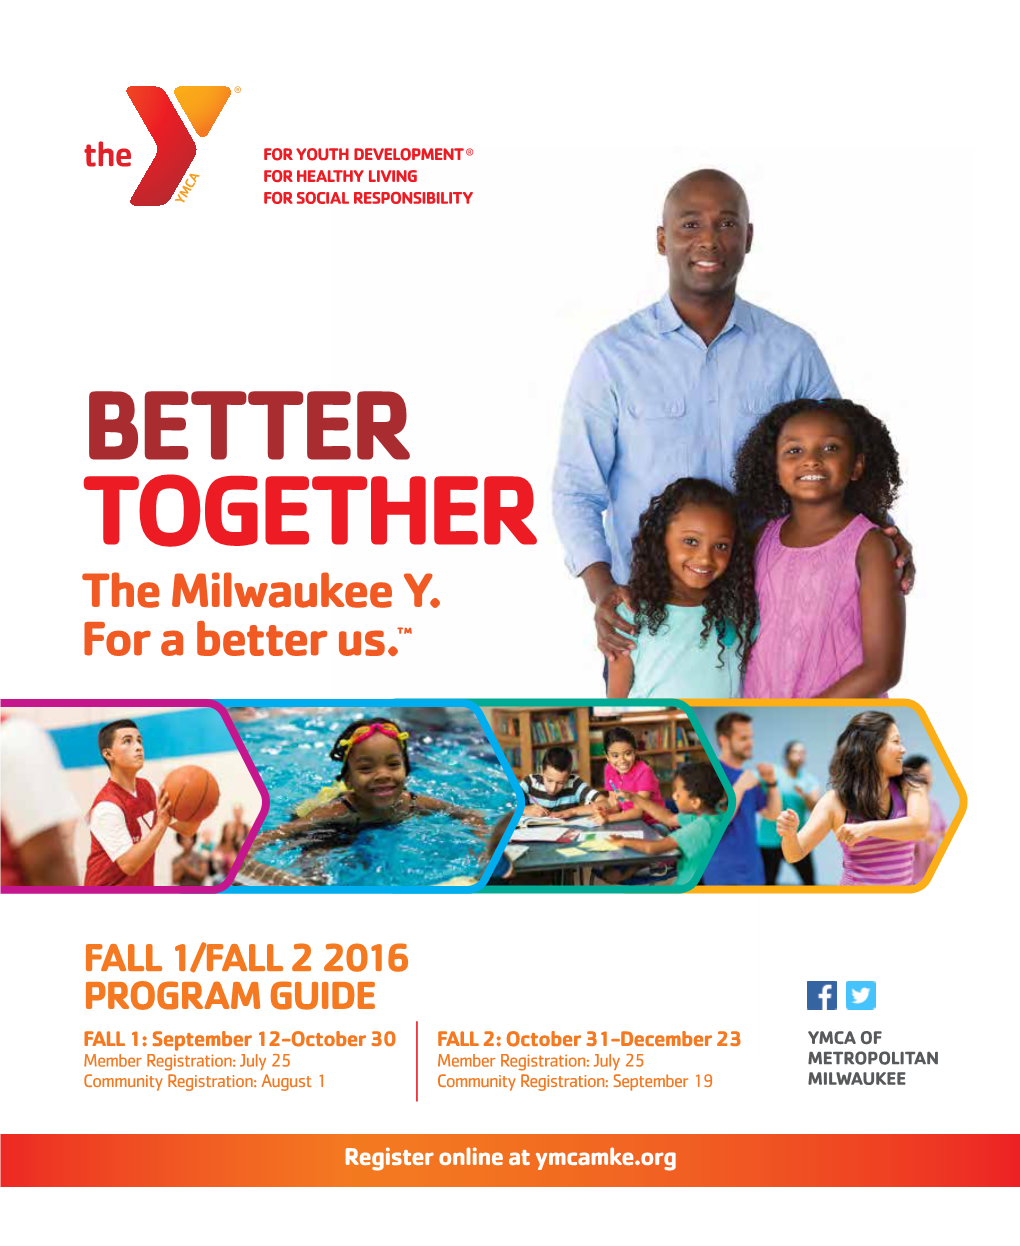 BETTER TOGETHER the Milwaukee Y